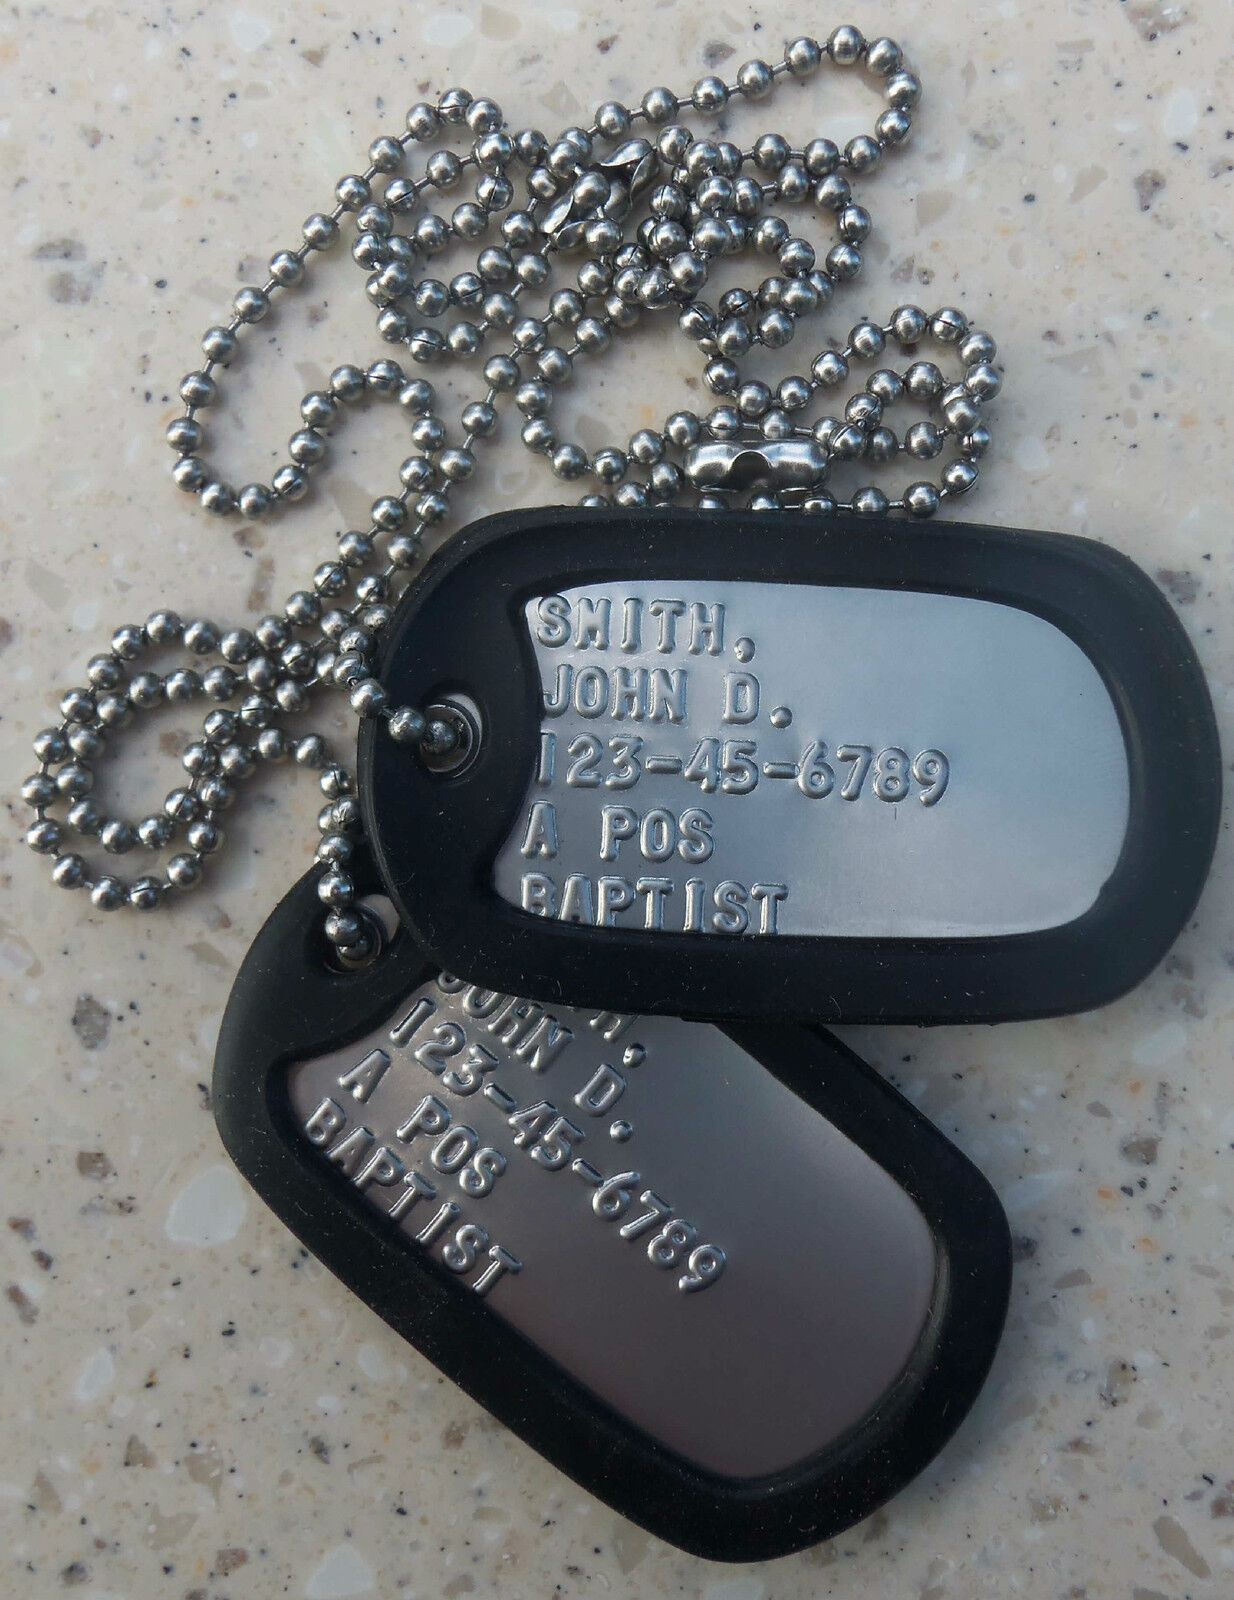 Real Standard Military Dog Tags Dogtags Made Just For U